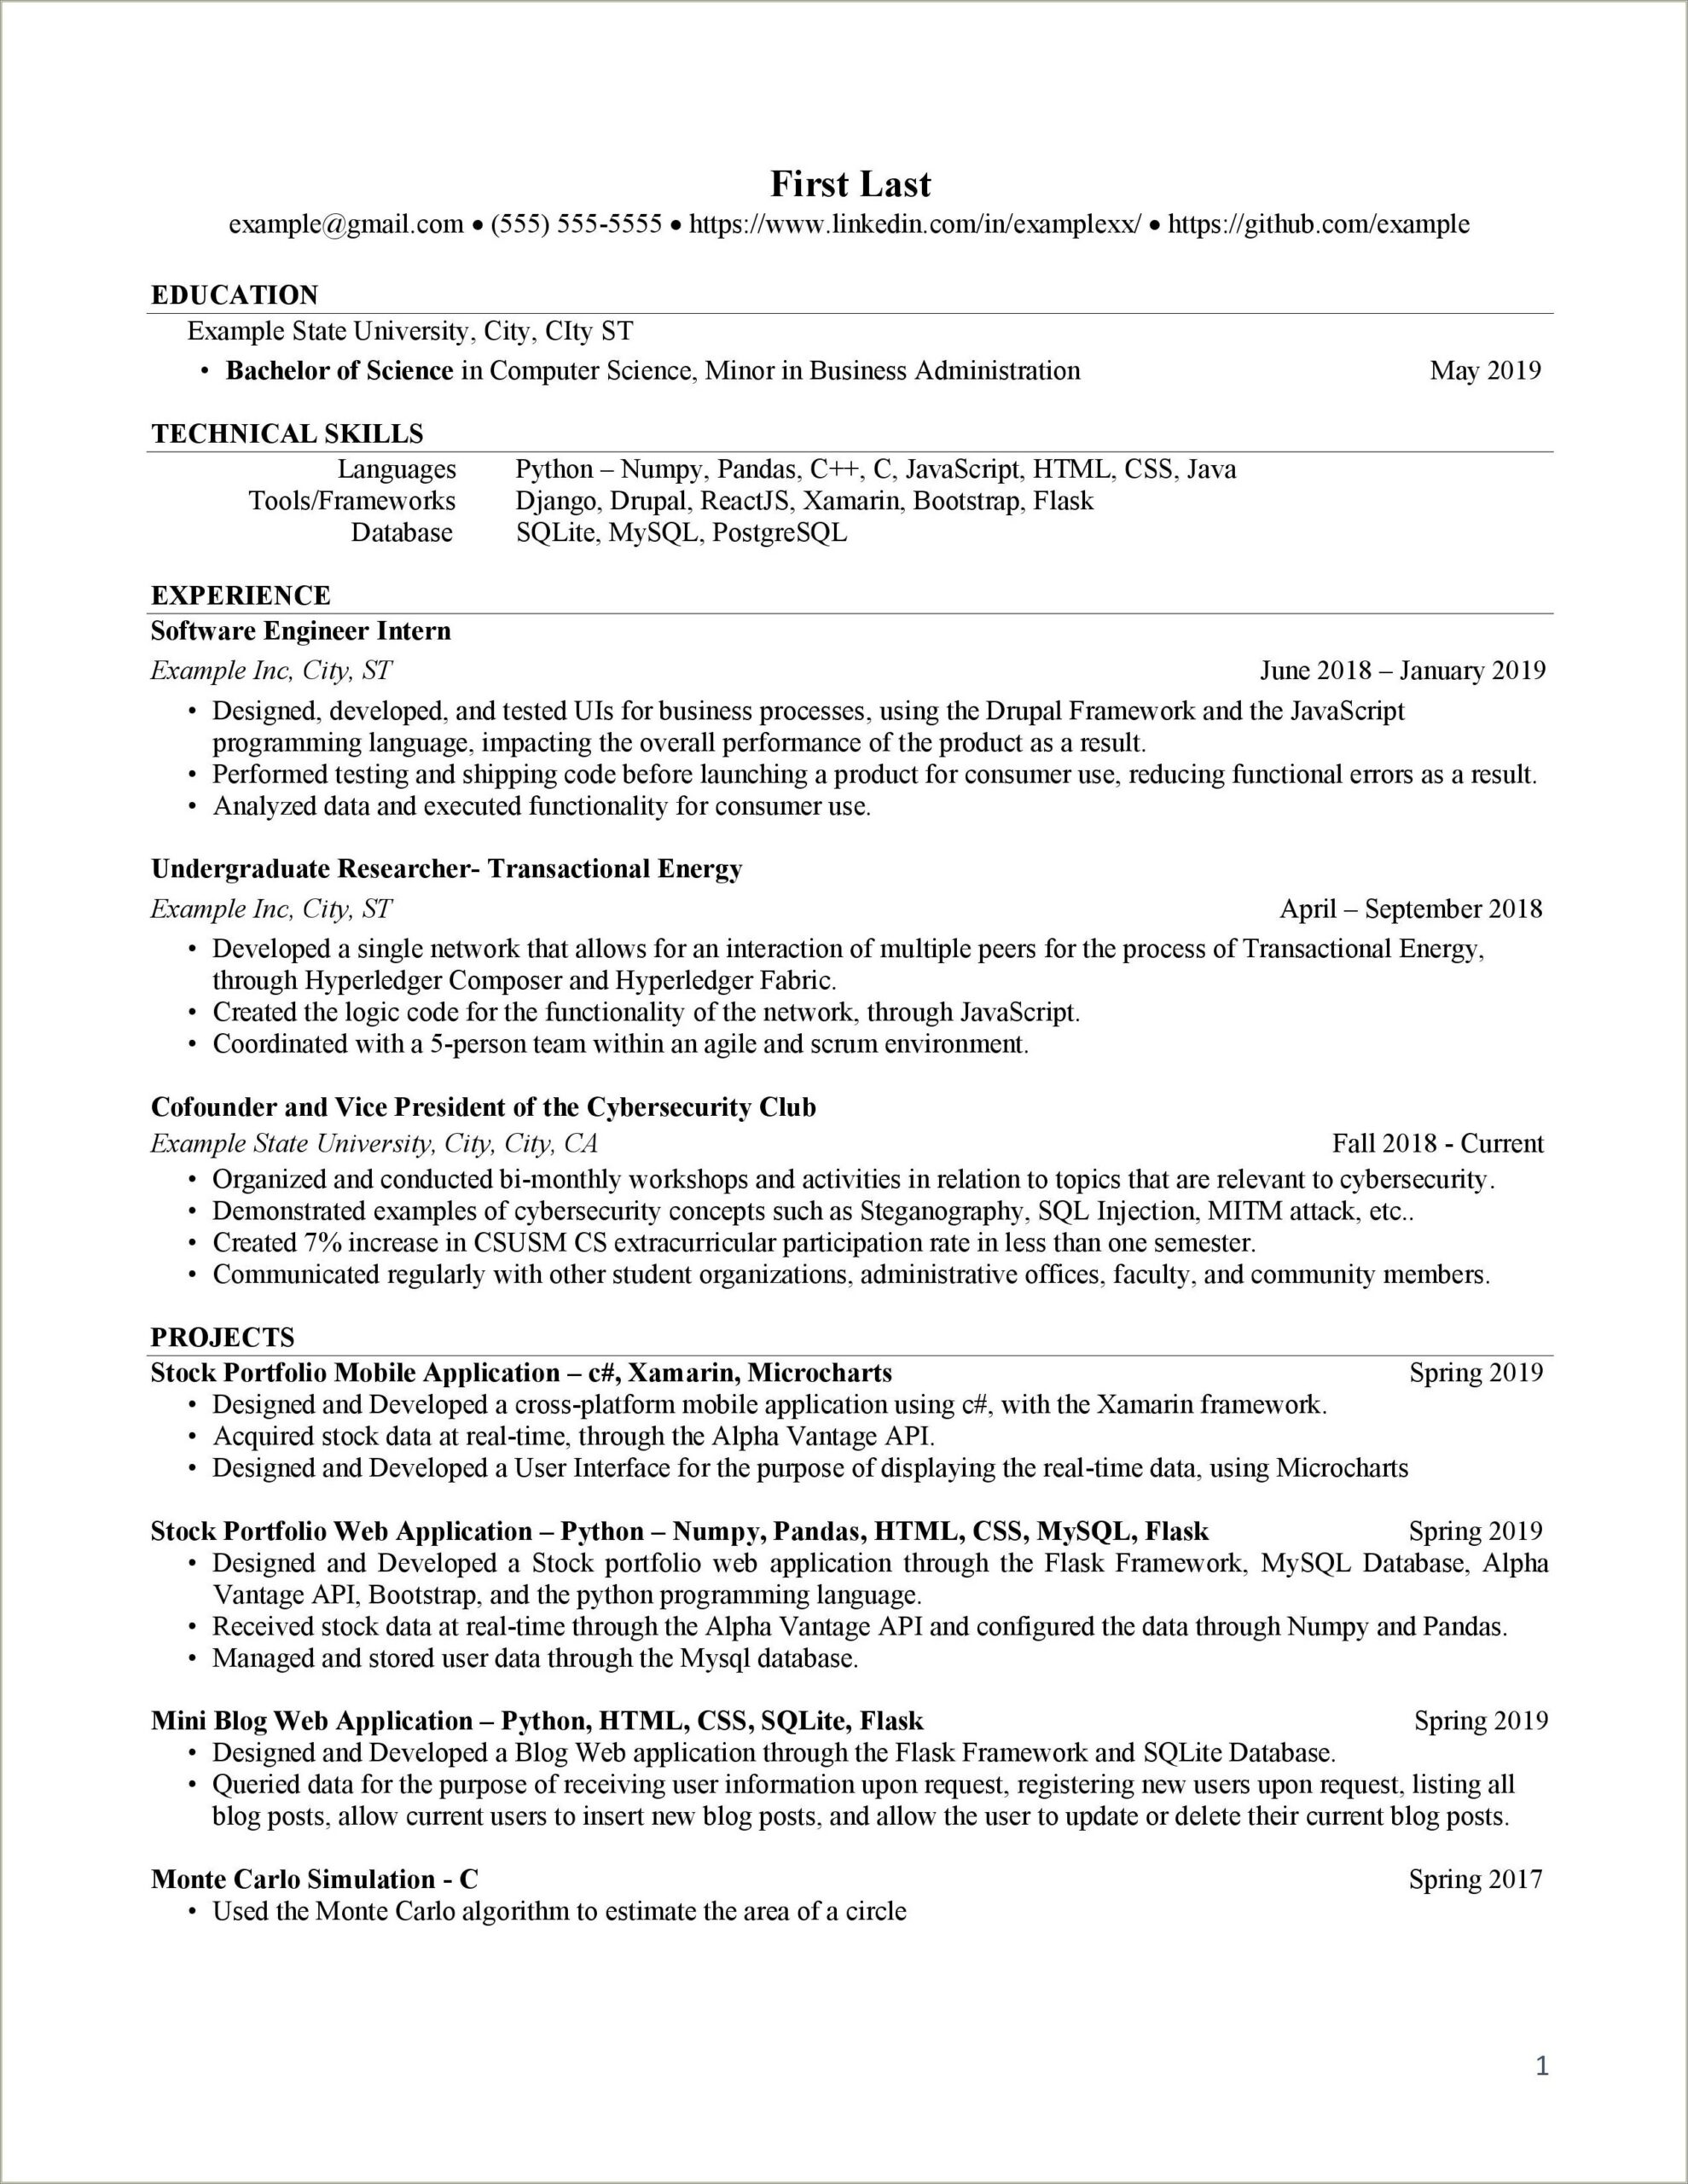 Examples Of Resumes For Engineering No Experience